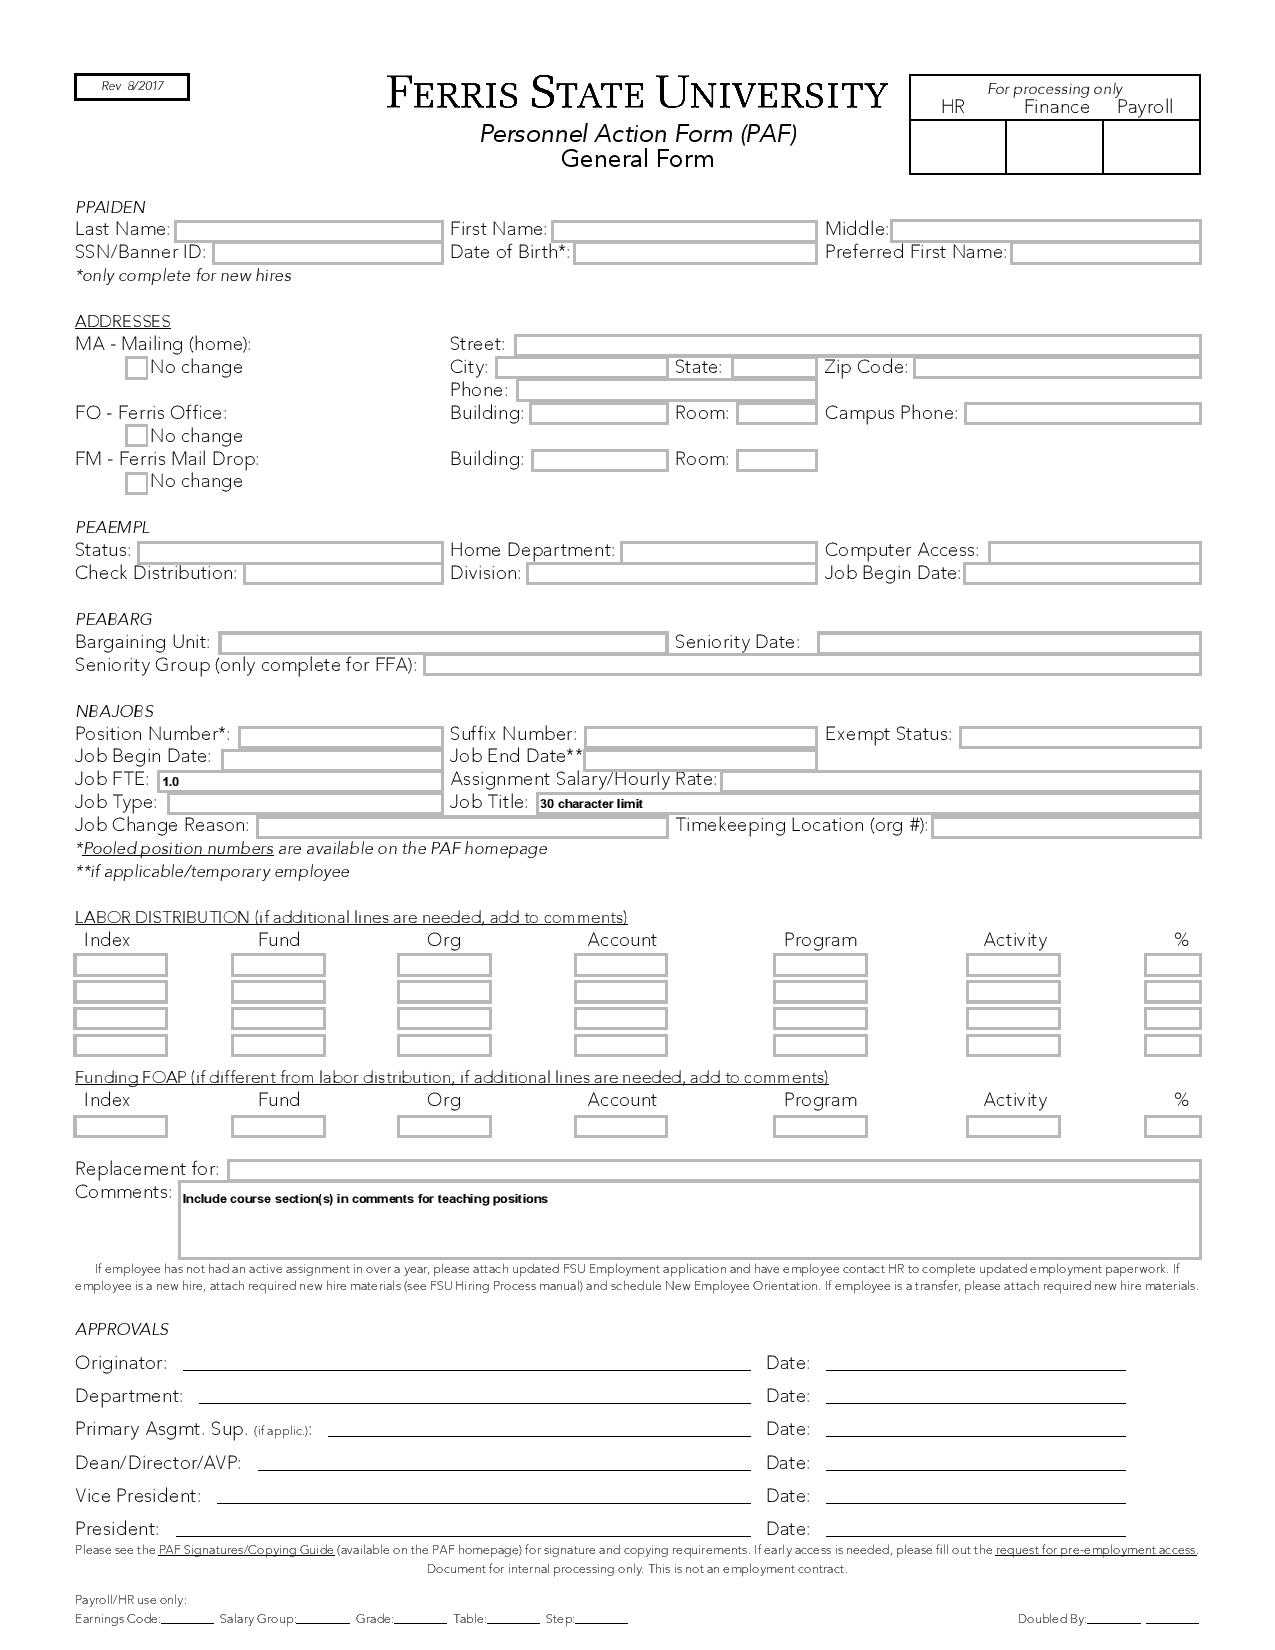 general personnel action form page 001